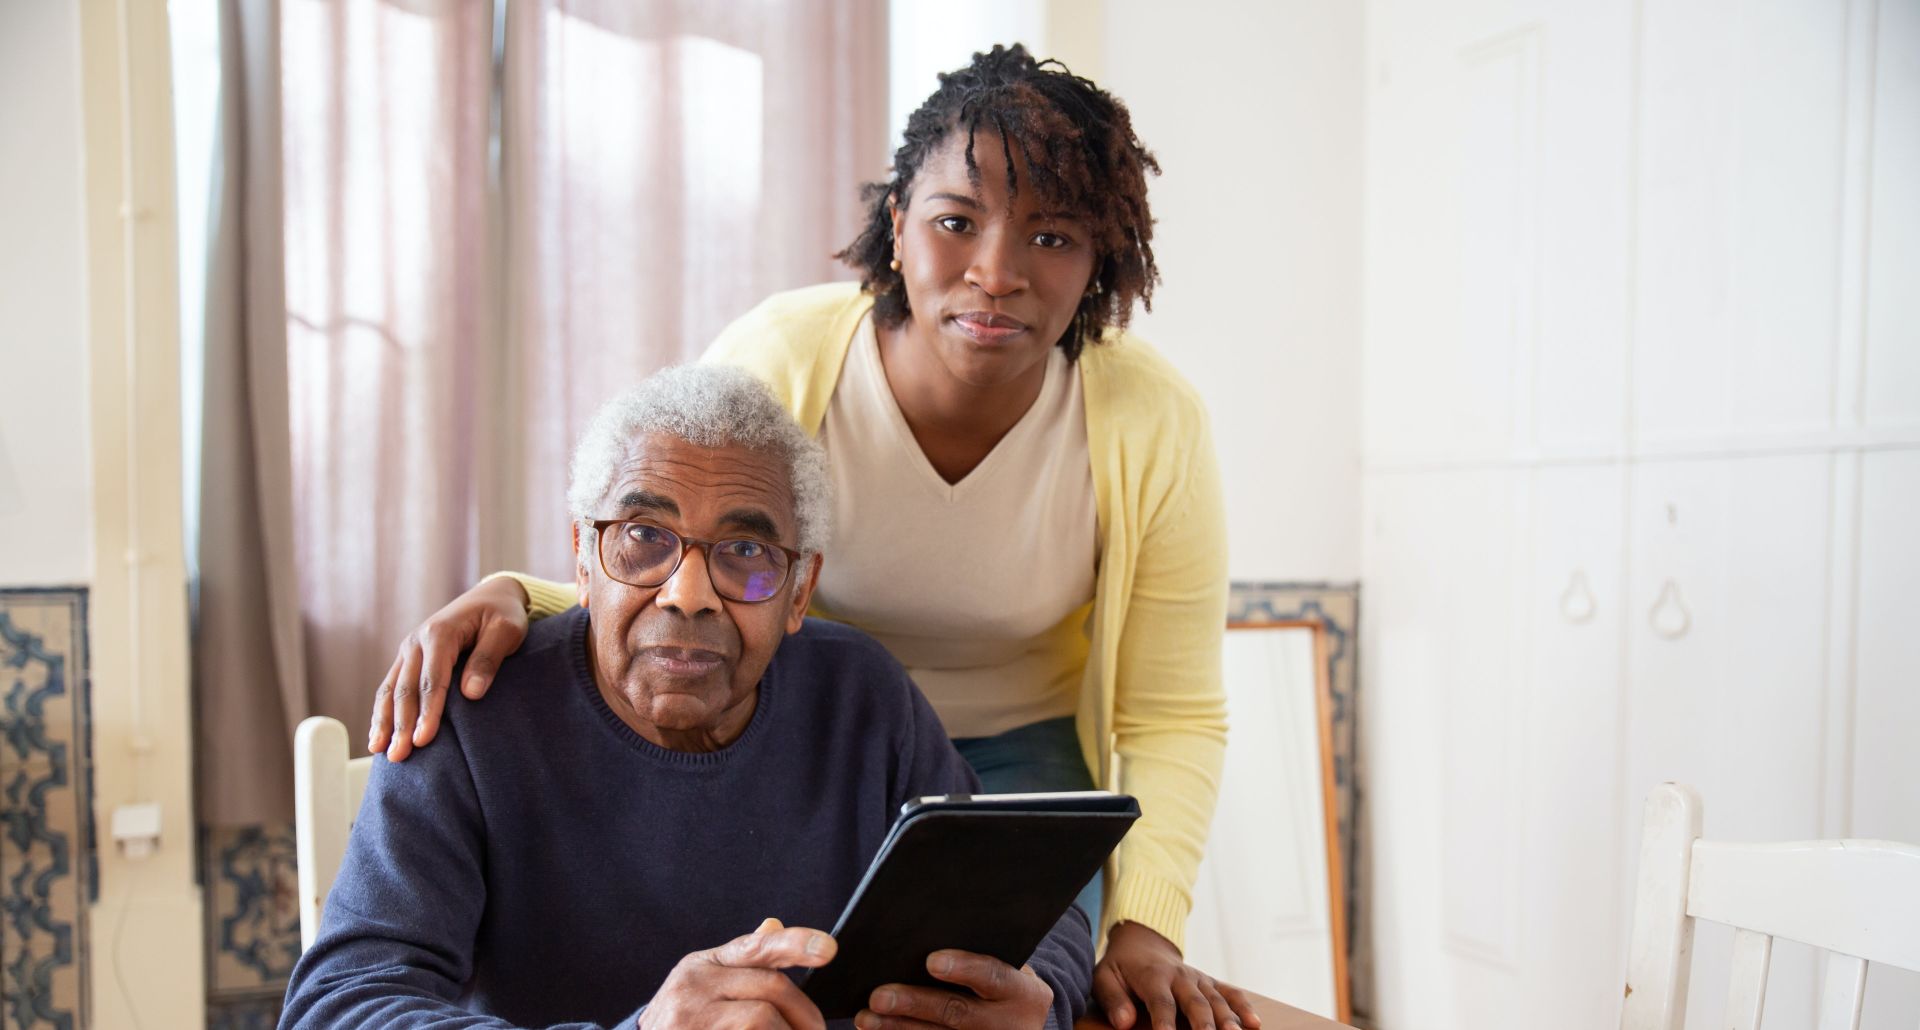 A Woman Standing Beside the Elderly Man Holding a Tablet